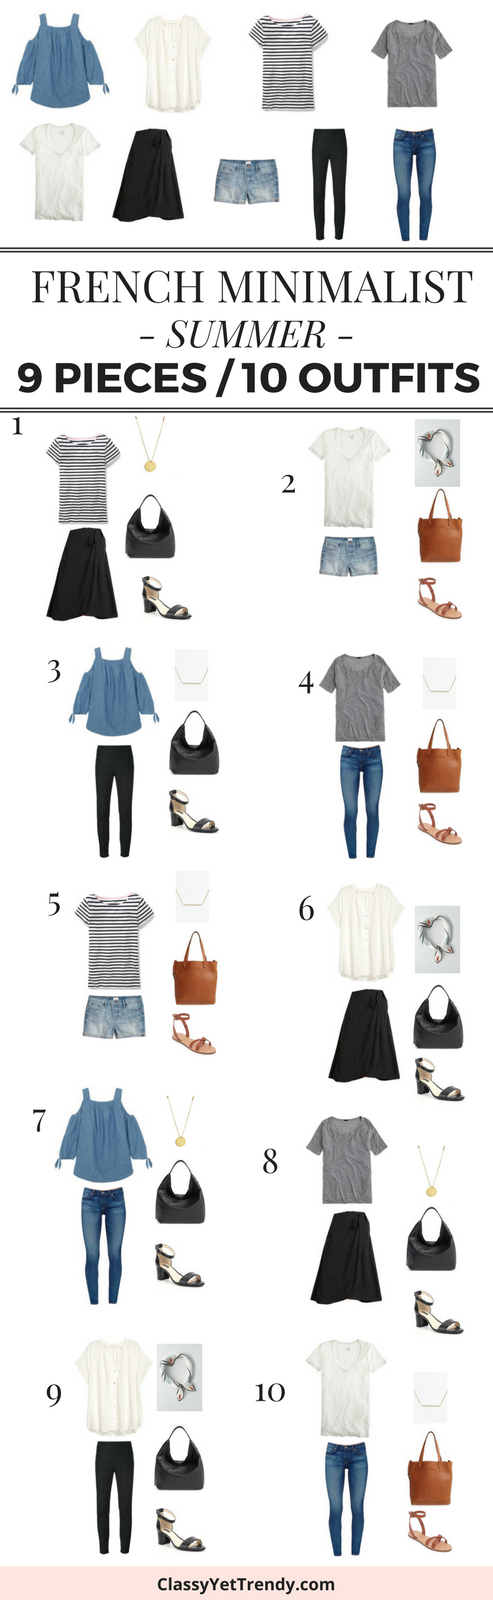 Turn 9 tops and bottoms into 10 outfits, French style!   If you have these 9 pieces in your closet, you can turn them into 10